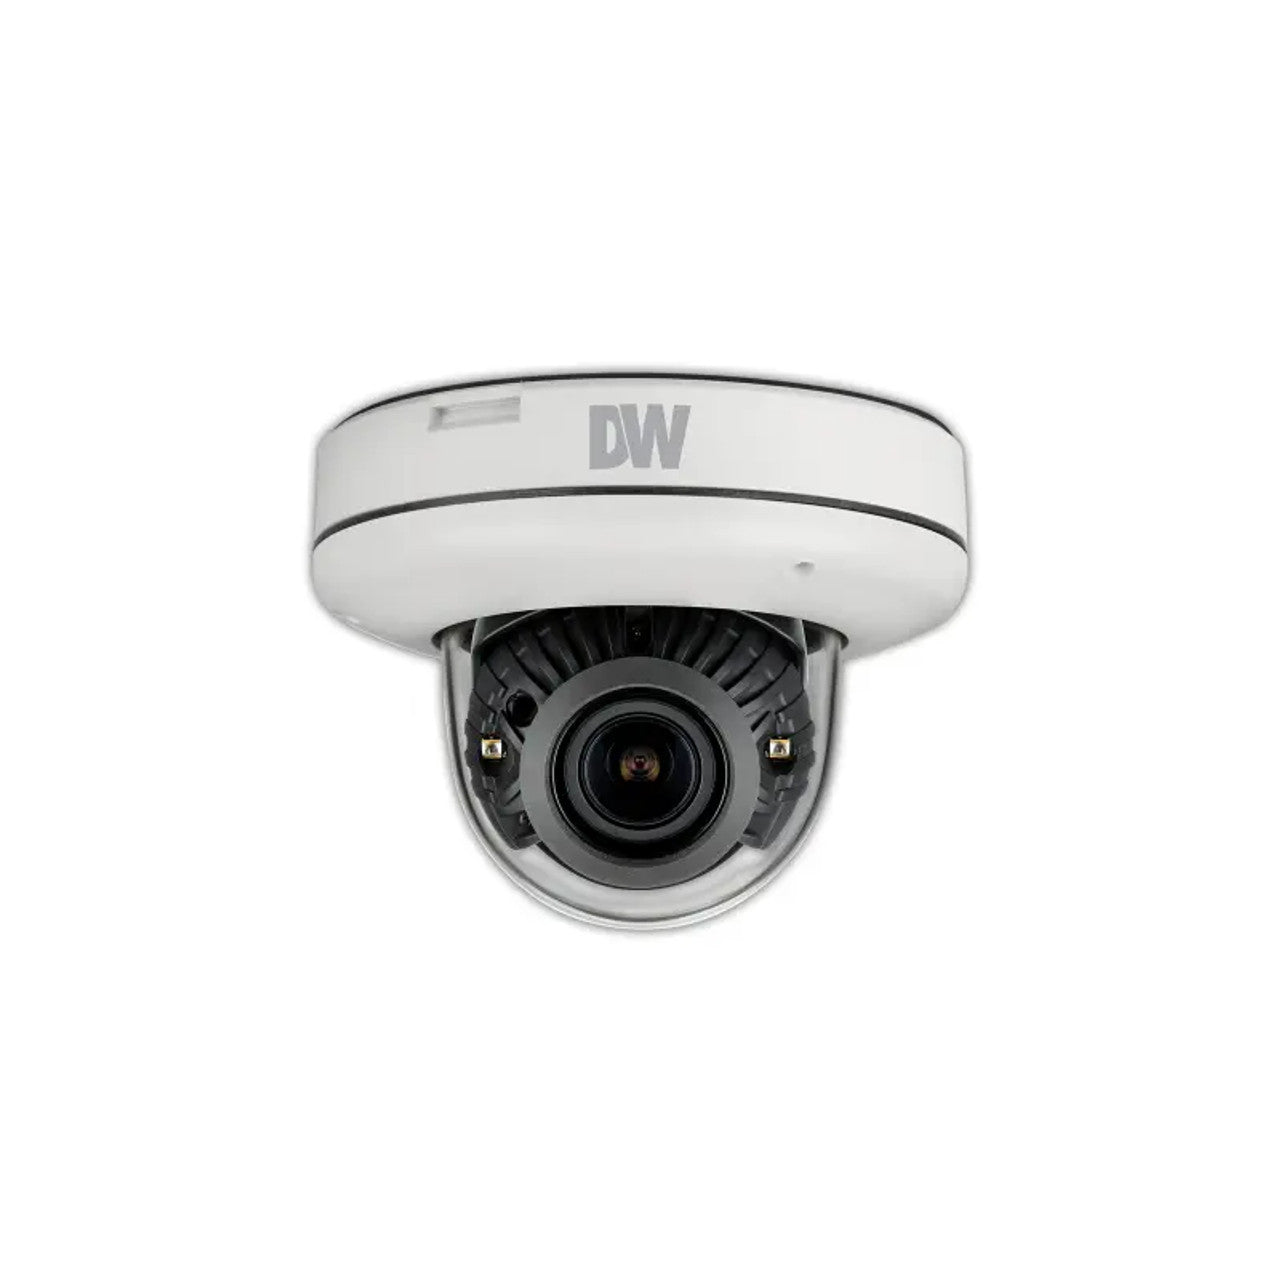 Digital Watchdog DWC-MPV85WiATW 5MP Outdoor Night Vision Dome IP Security Camera with 5x Optical Zoom